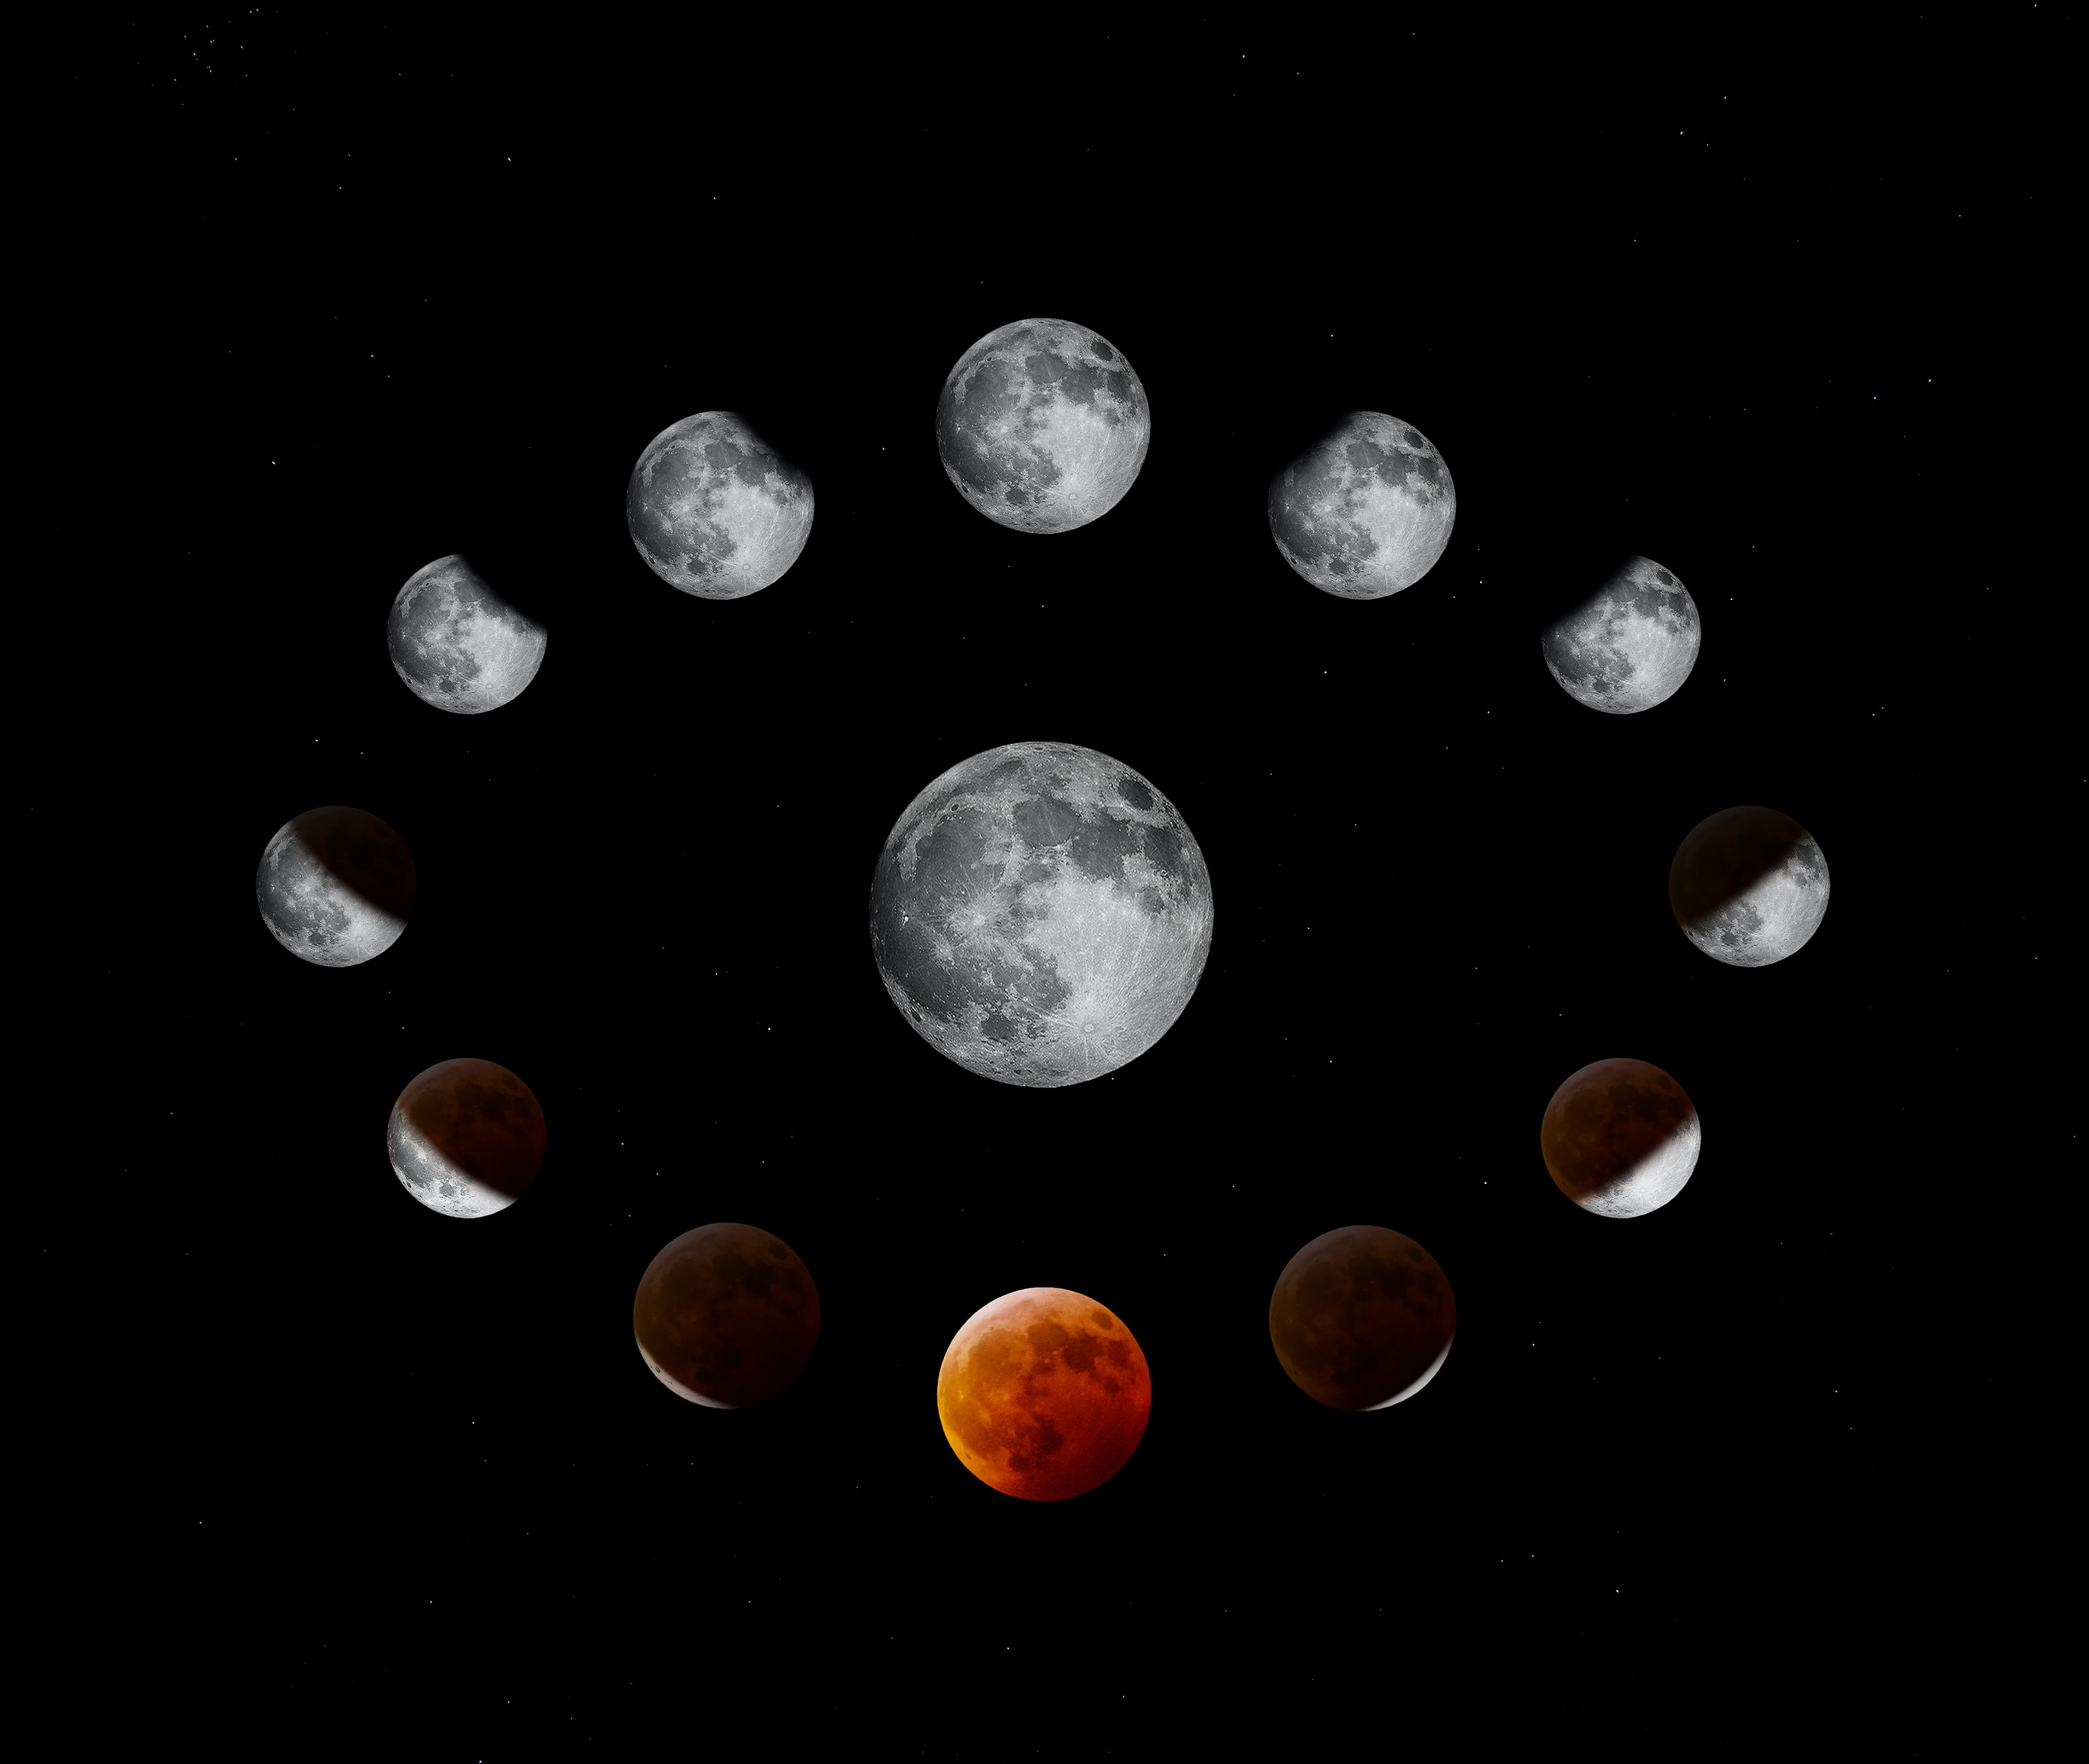 HD wallpaper, Outer Space, Astronomy, Full Moon, Pattern, Black Background, Lunar Eclipse